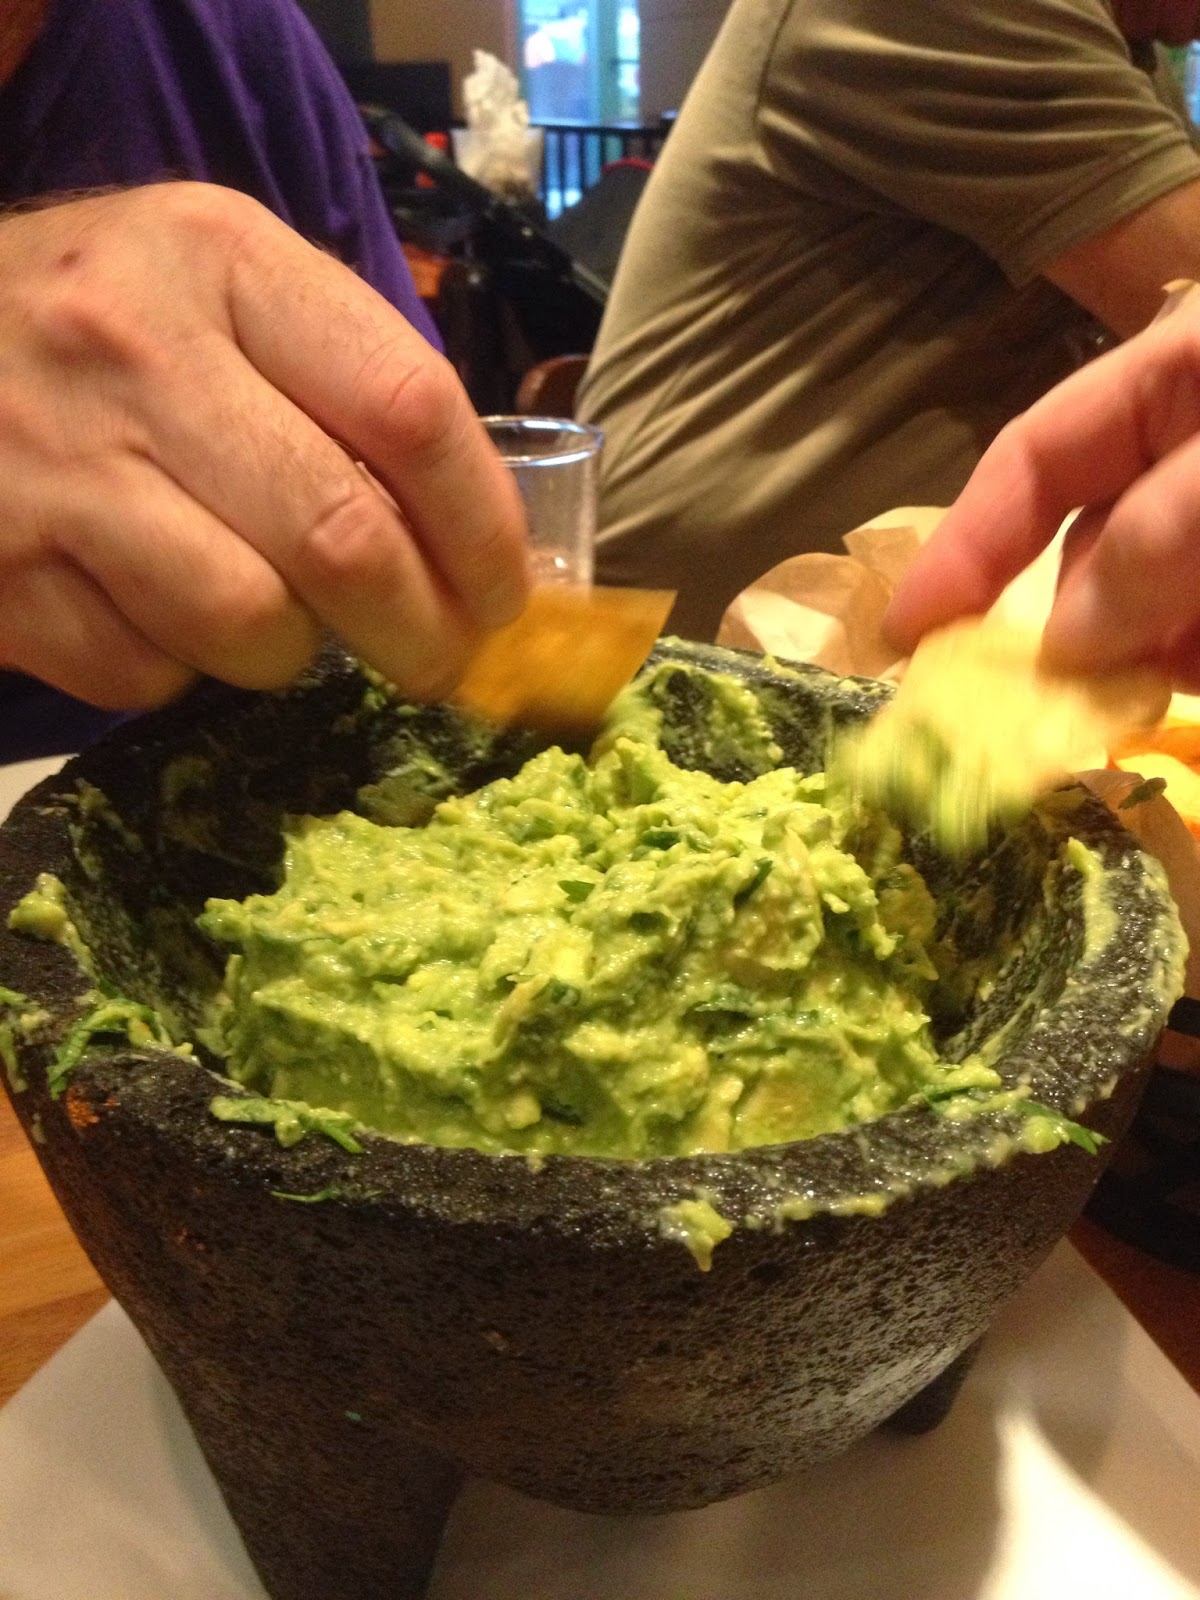 people dipping chips into guacamole at a party